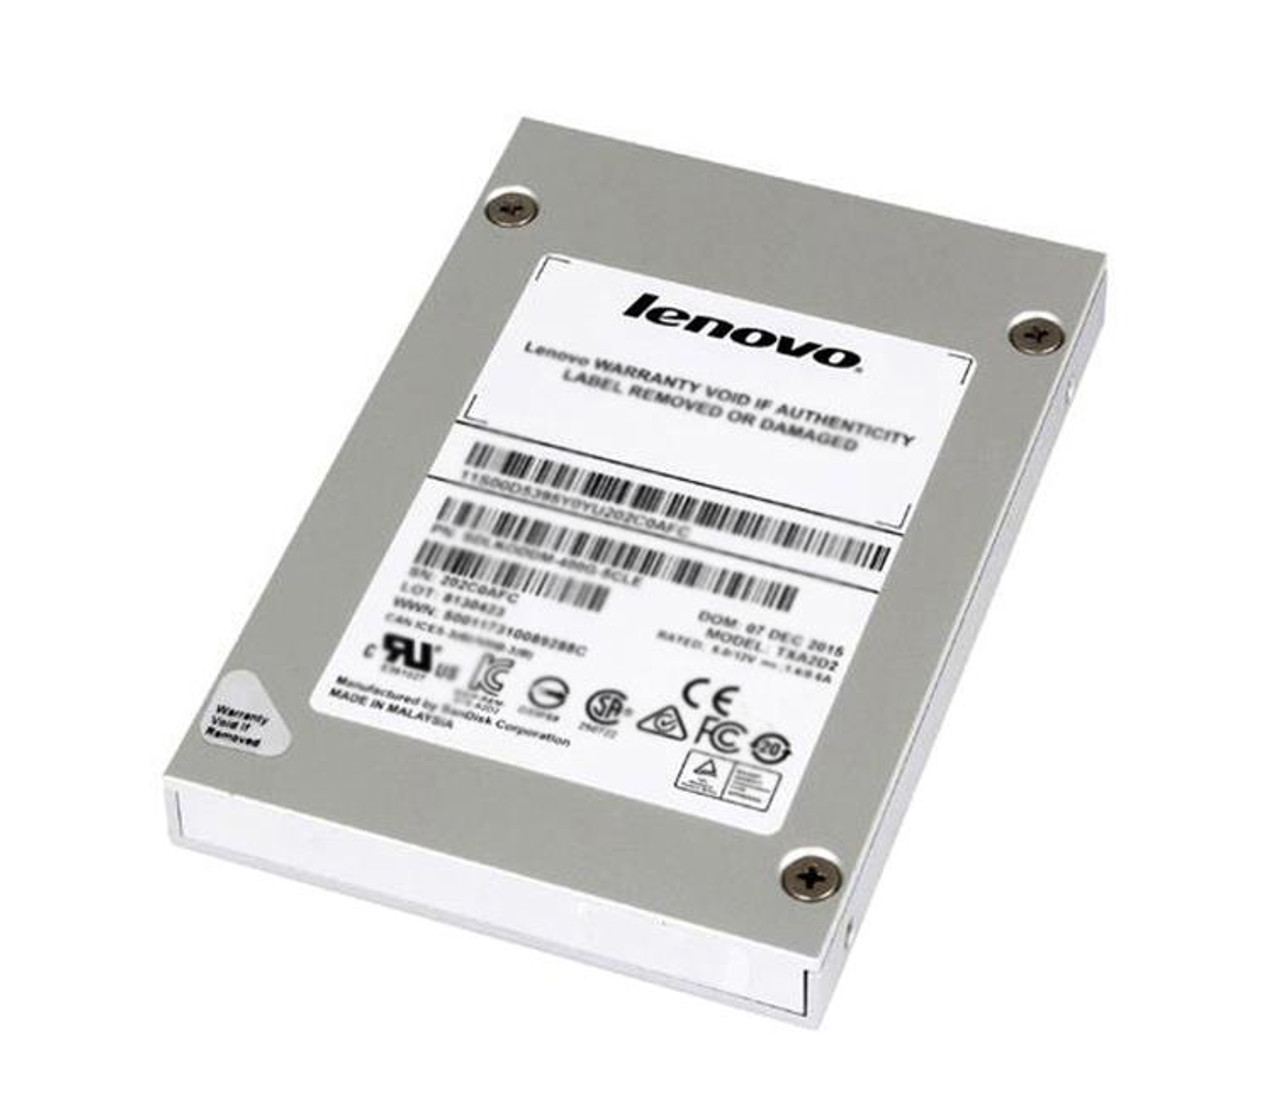 00XH259 Lenovo 120GB SATA 6Gbps Hot Swap 2.5-inch Internal Solid State Drive (SSD) for ThinkServer TS460